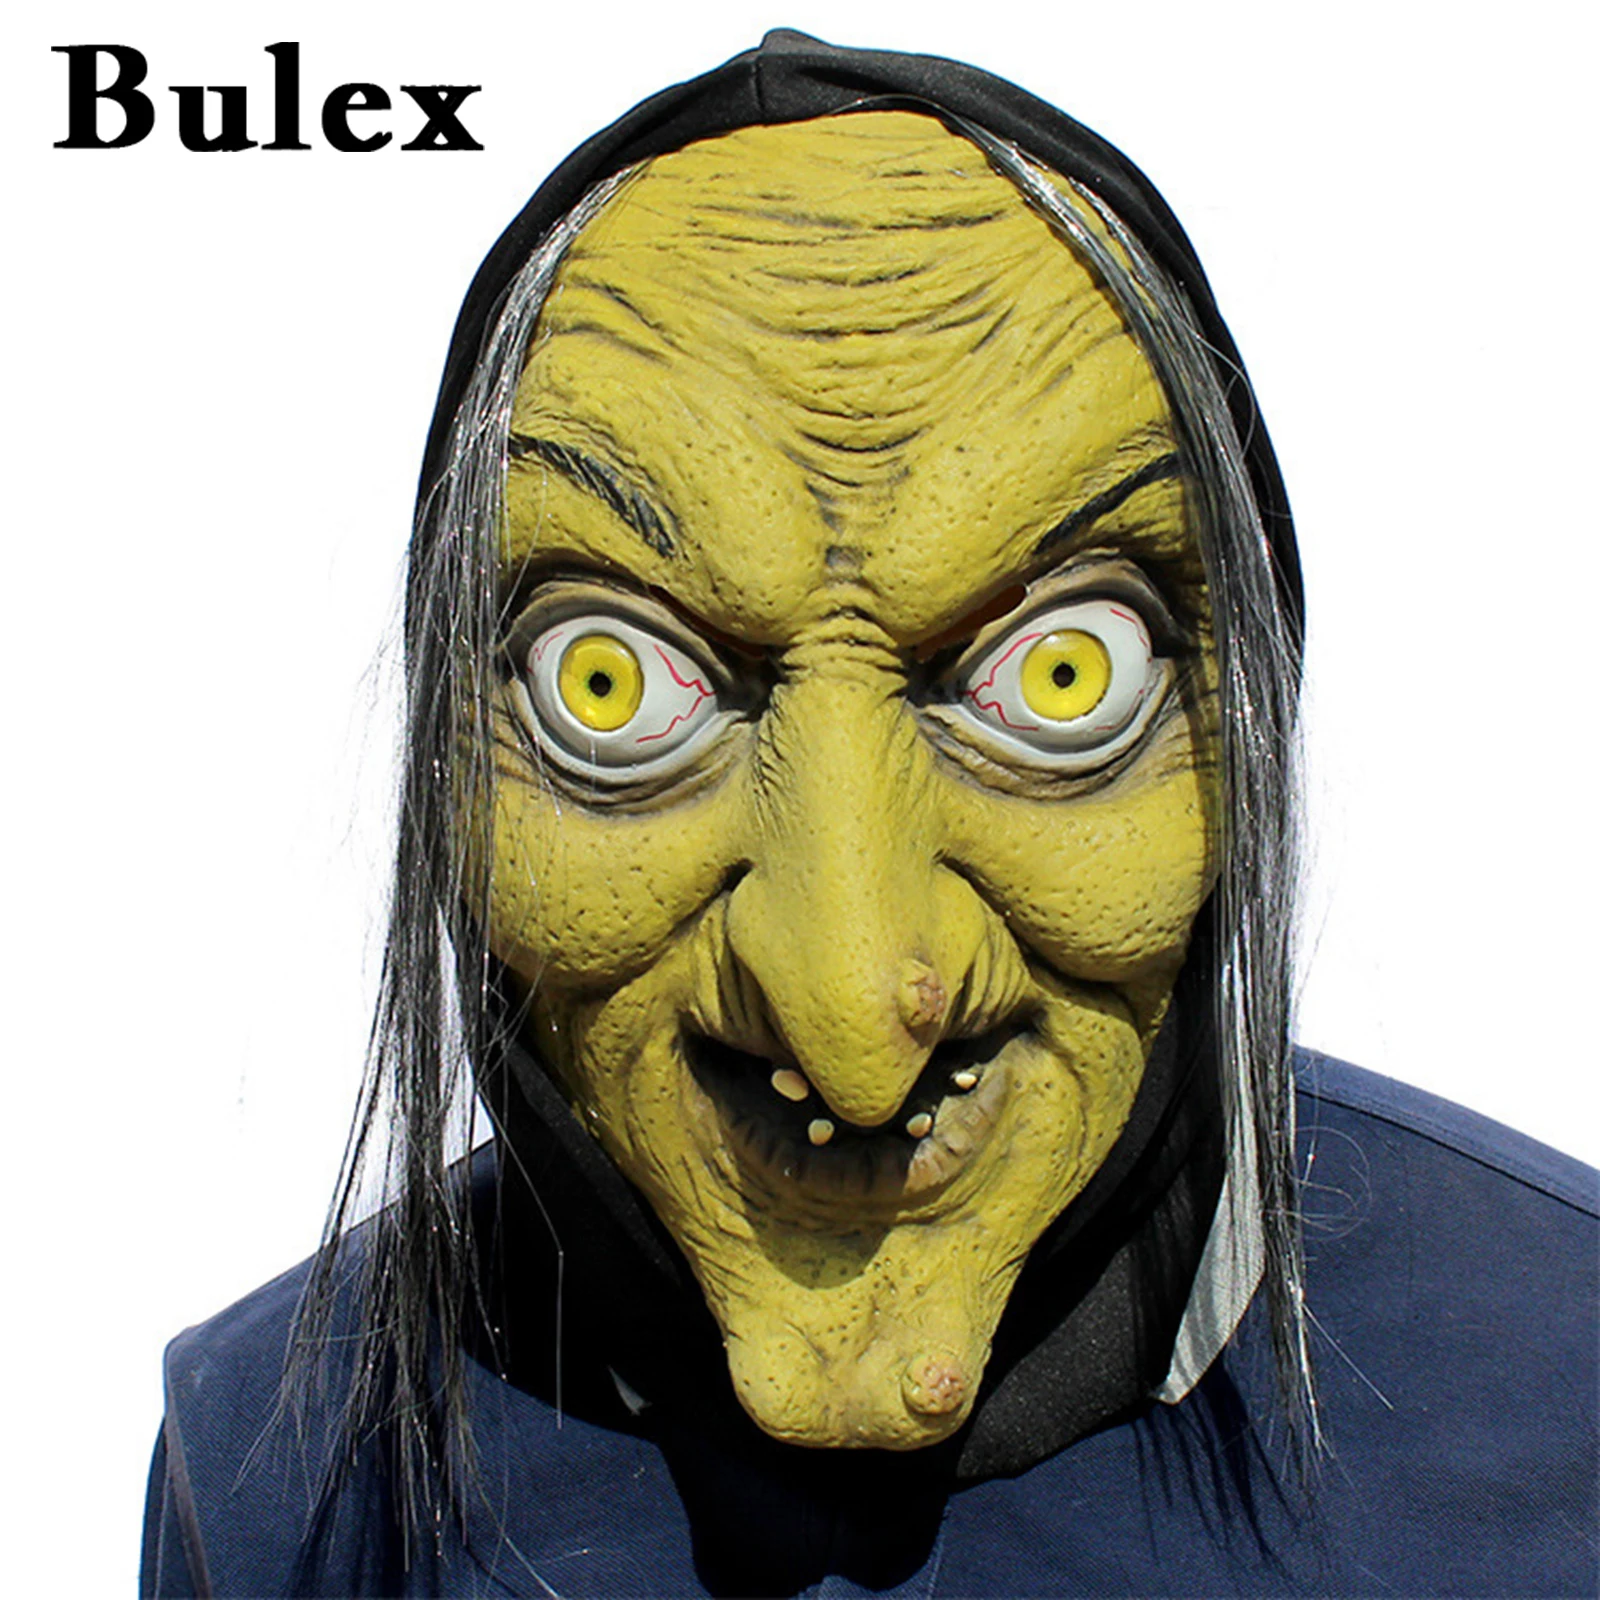 

Bulex Witch Mask Ghoul Scary Halloween Masks Latex Fancy Dress Demon Evil Witches Mask Party Prop